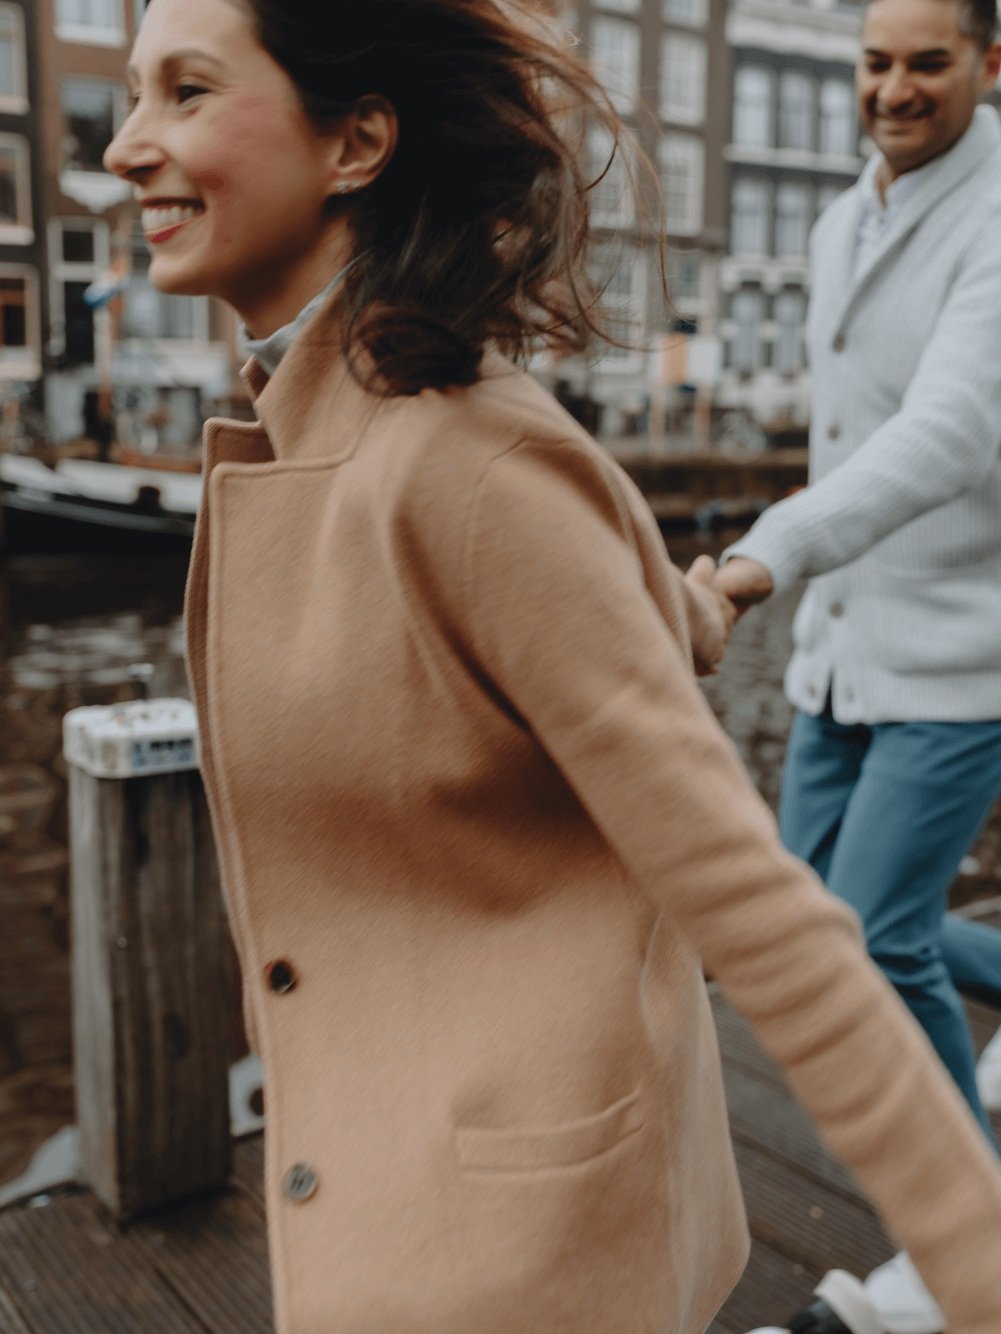 Family Photoshoot in Amsterdam by Vicky McLachlan Photography - American Family with husband and wife running together while holding hands on a dock next to a Dutch canal_1-1.png